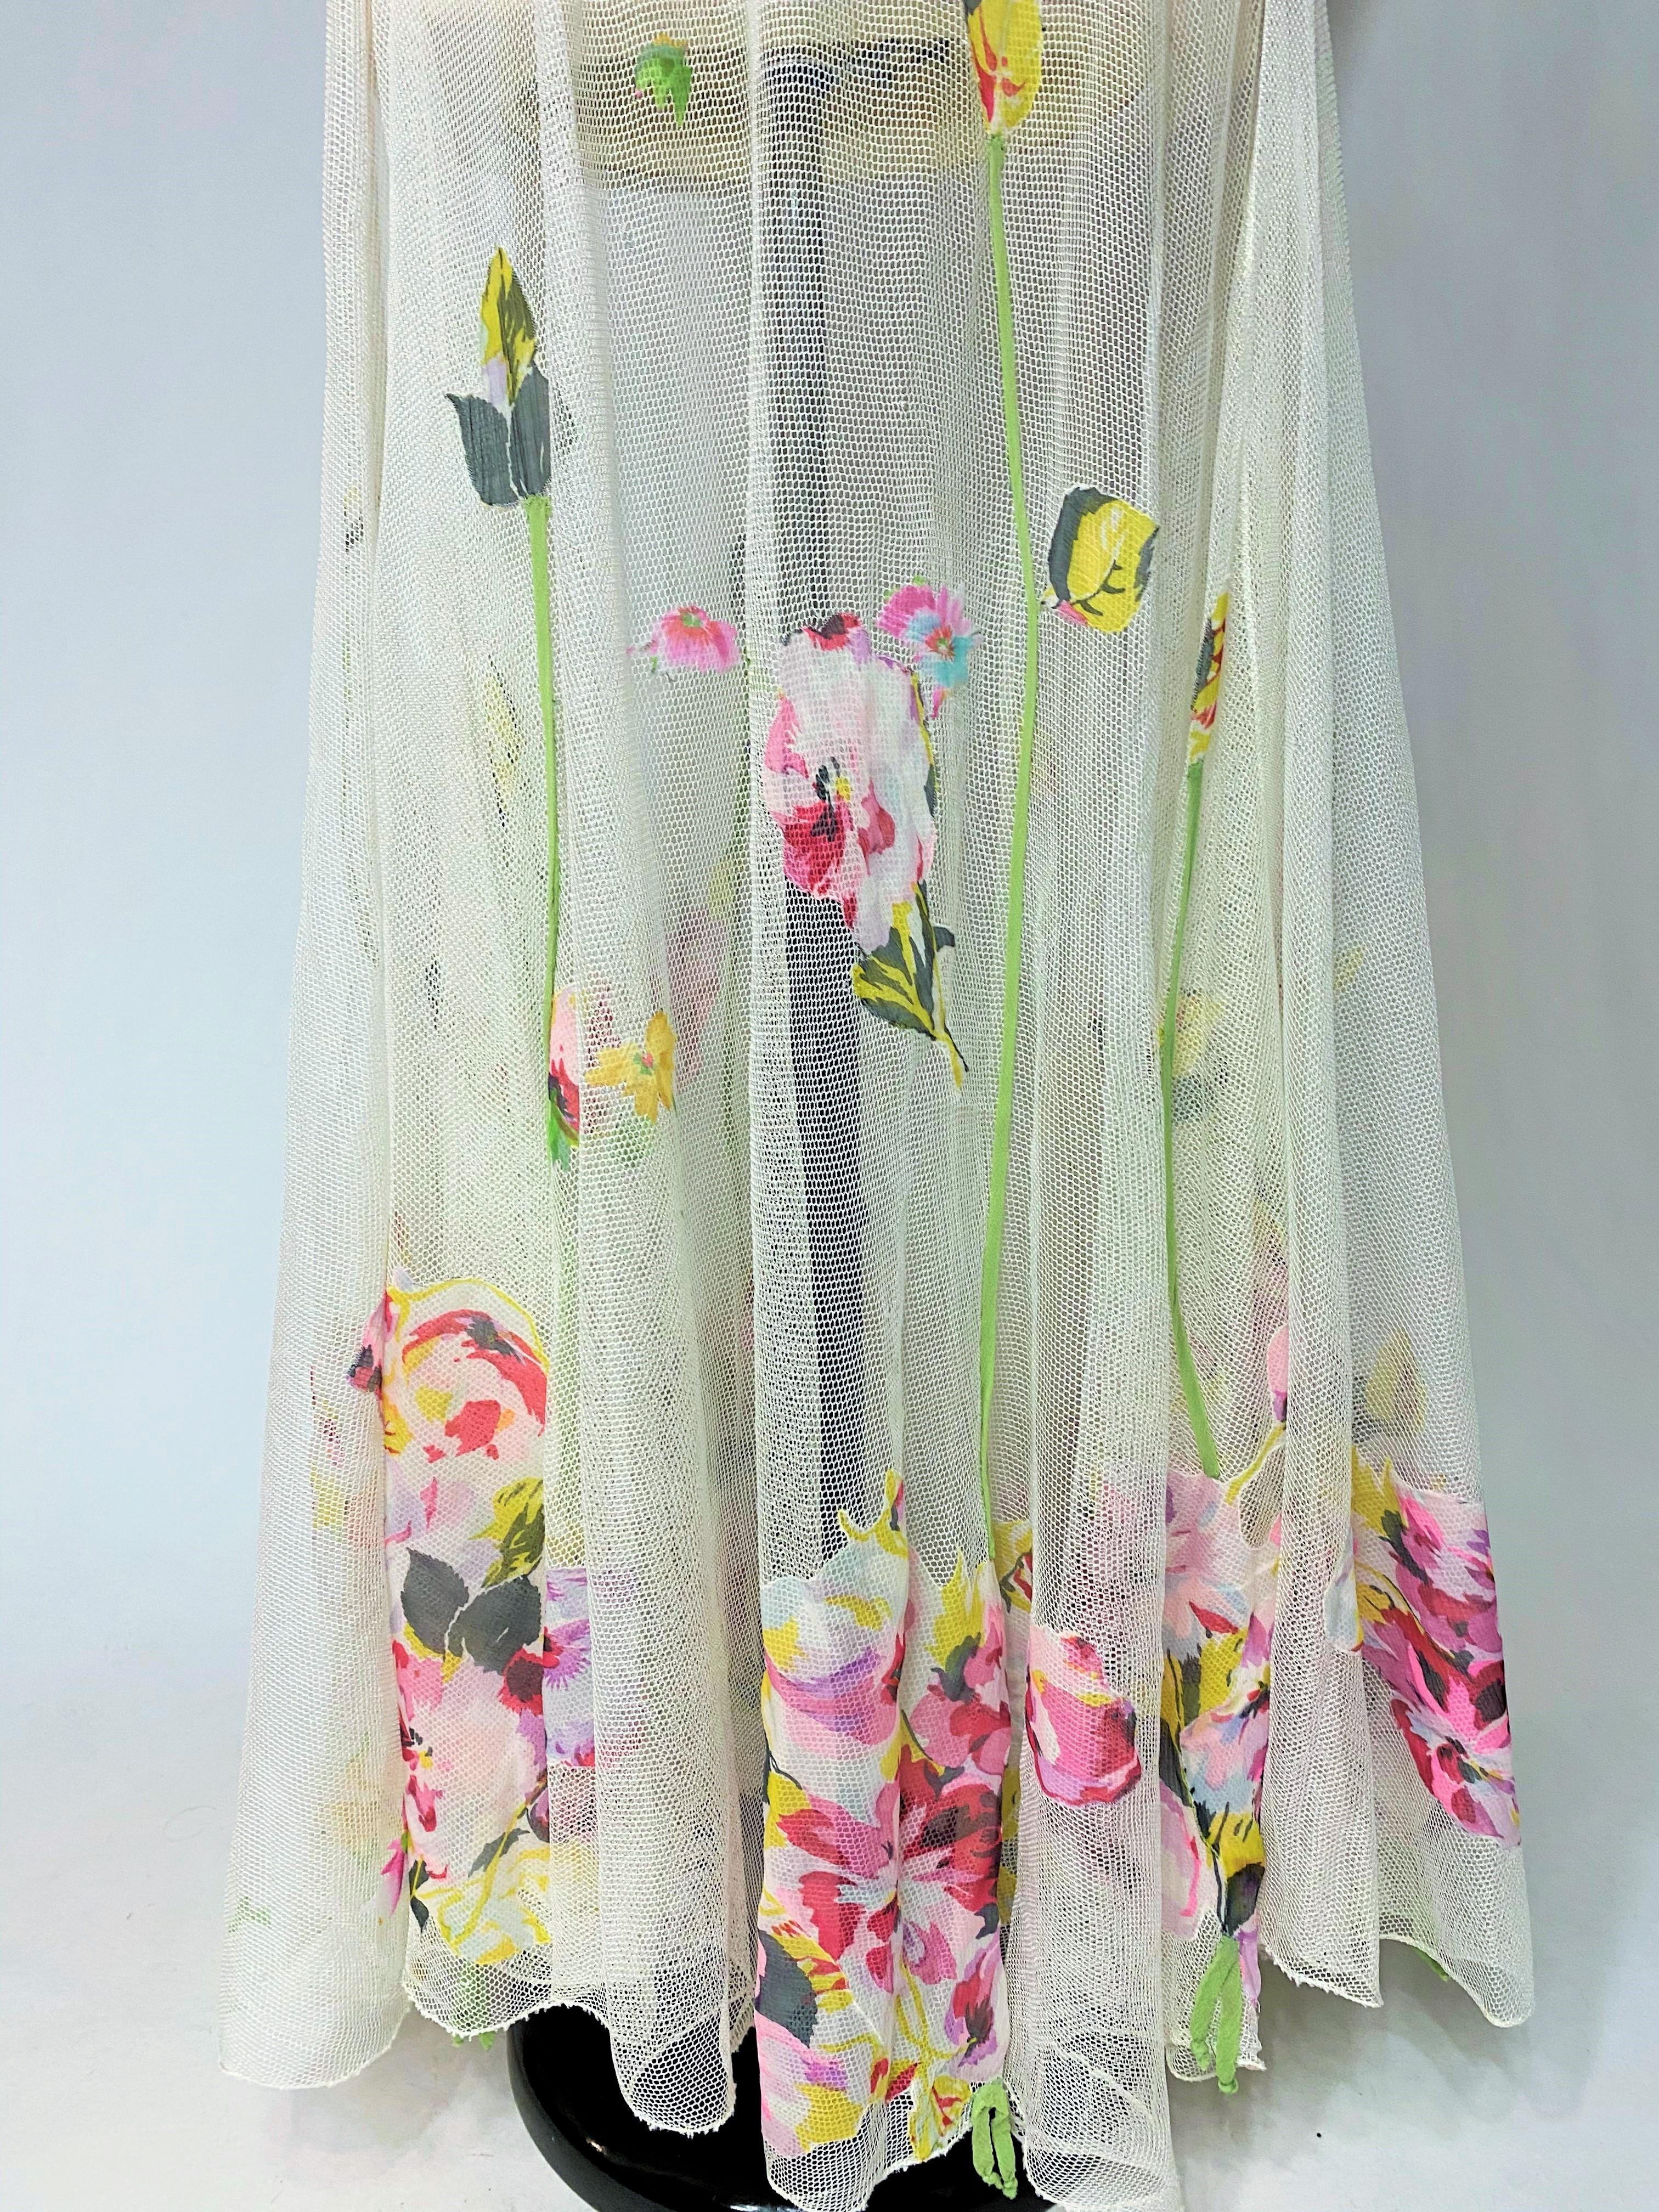 A Romantic Dress in white cotton Net applied with printed Chiffon Circa 1938 For Sale 2